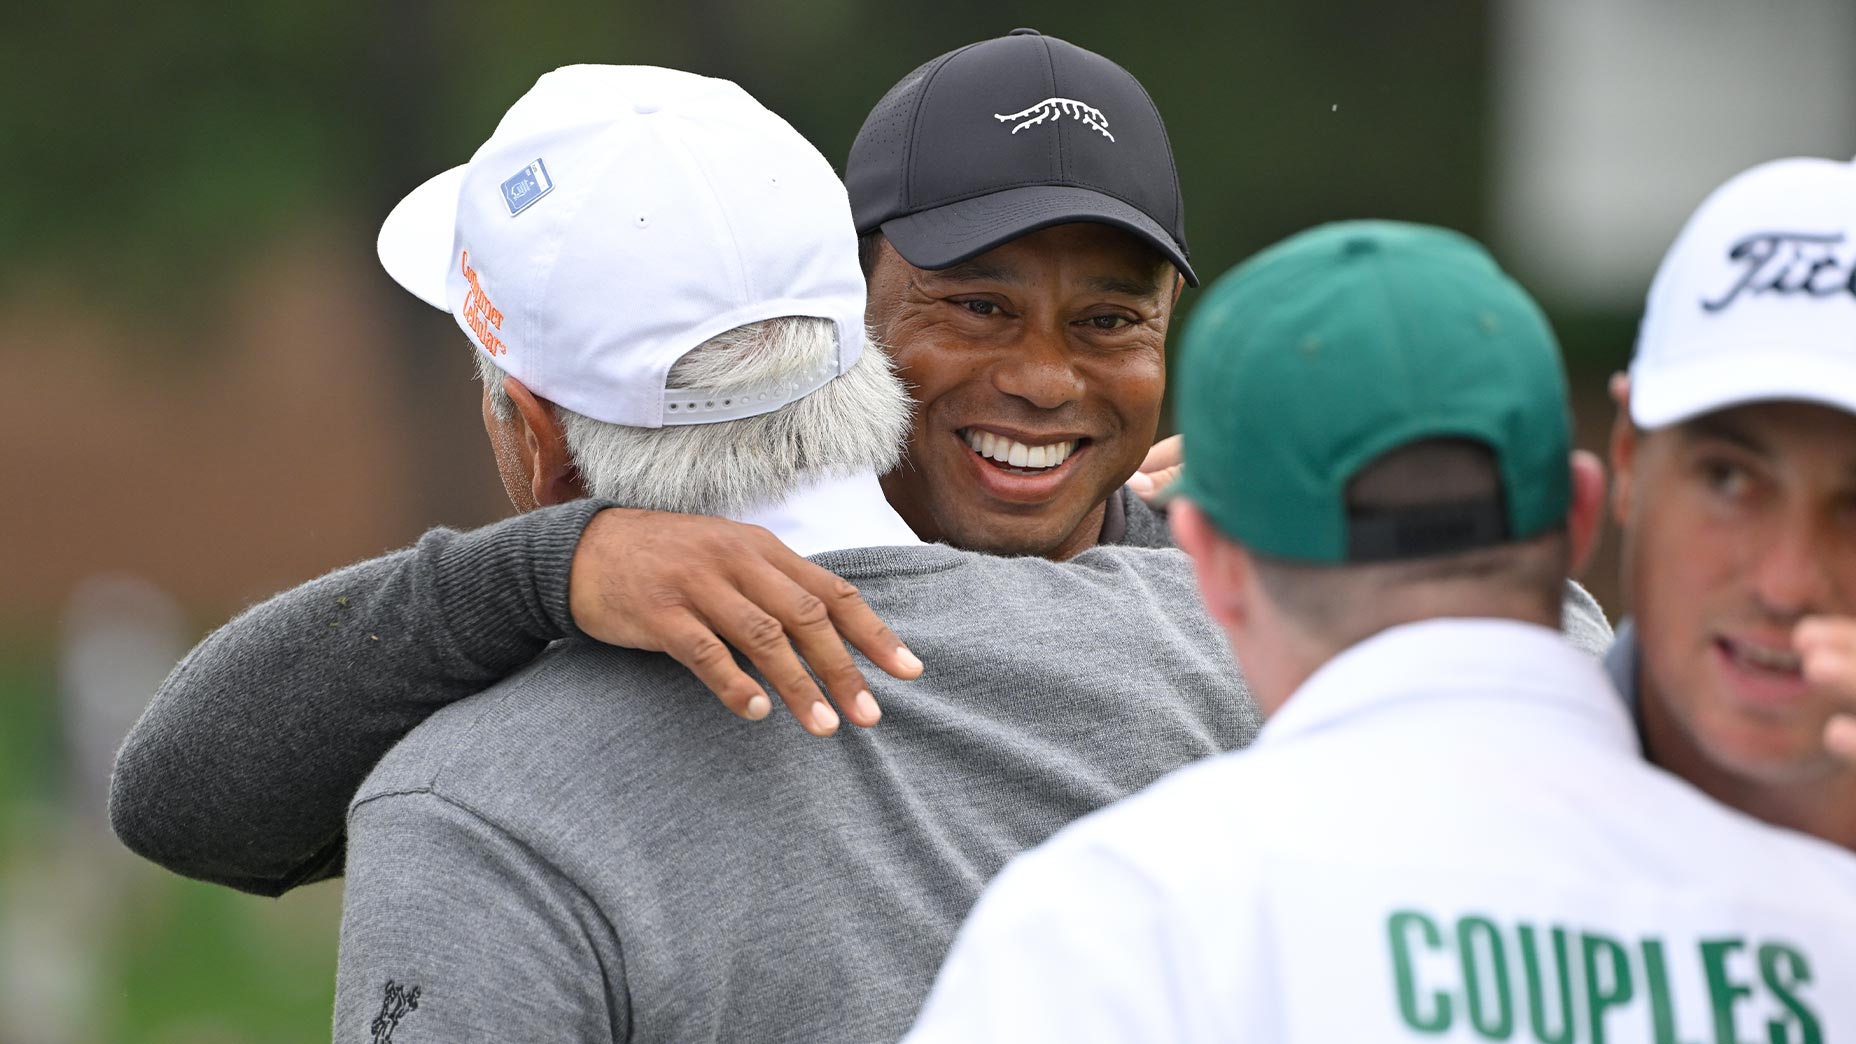 tiger woods and fred couples hug from the masters 18th green with Justin Thomas in the foreground